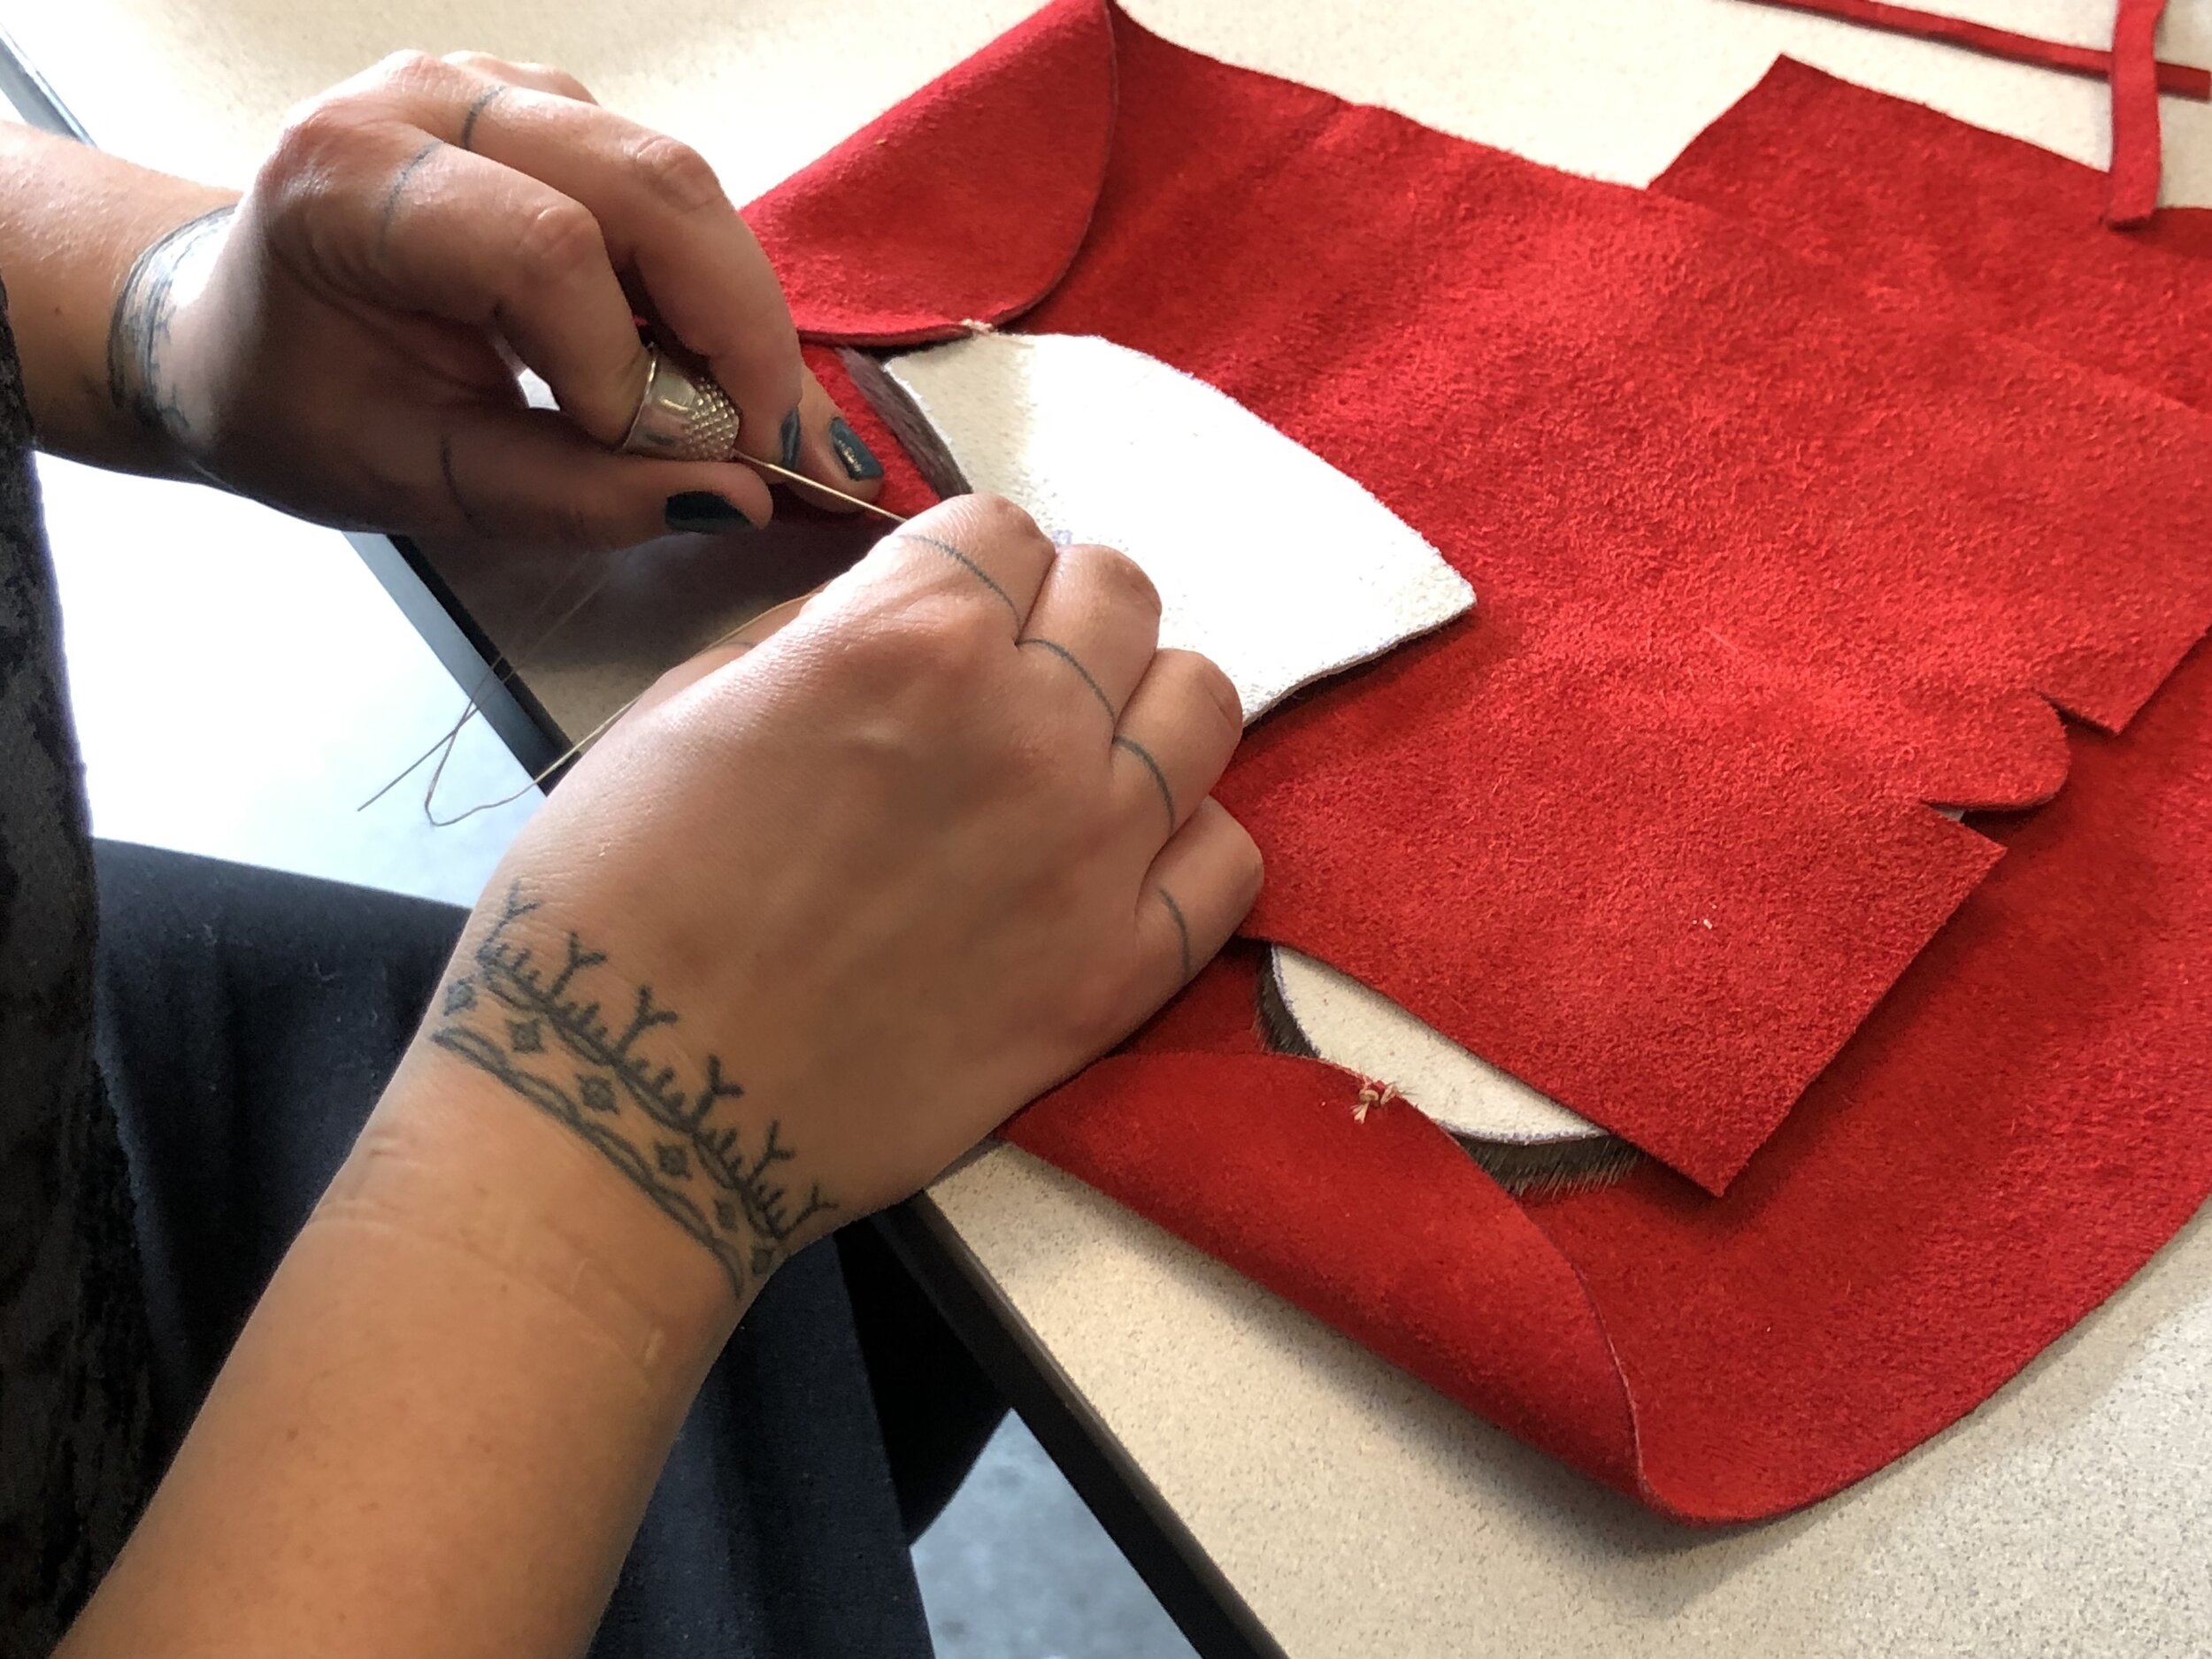  Heather Igloliorte sewing her pair of slippers at the Labrador Inuit Slipper Making Workshop, led by Veronica Flowers and Vanessa Flowers. This session was held at Concordia University, Montreal QC, October 2019. Photo courtesy of Heather Igloliorte